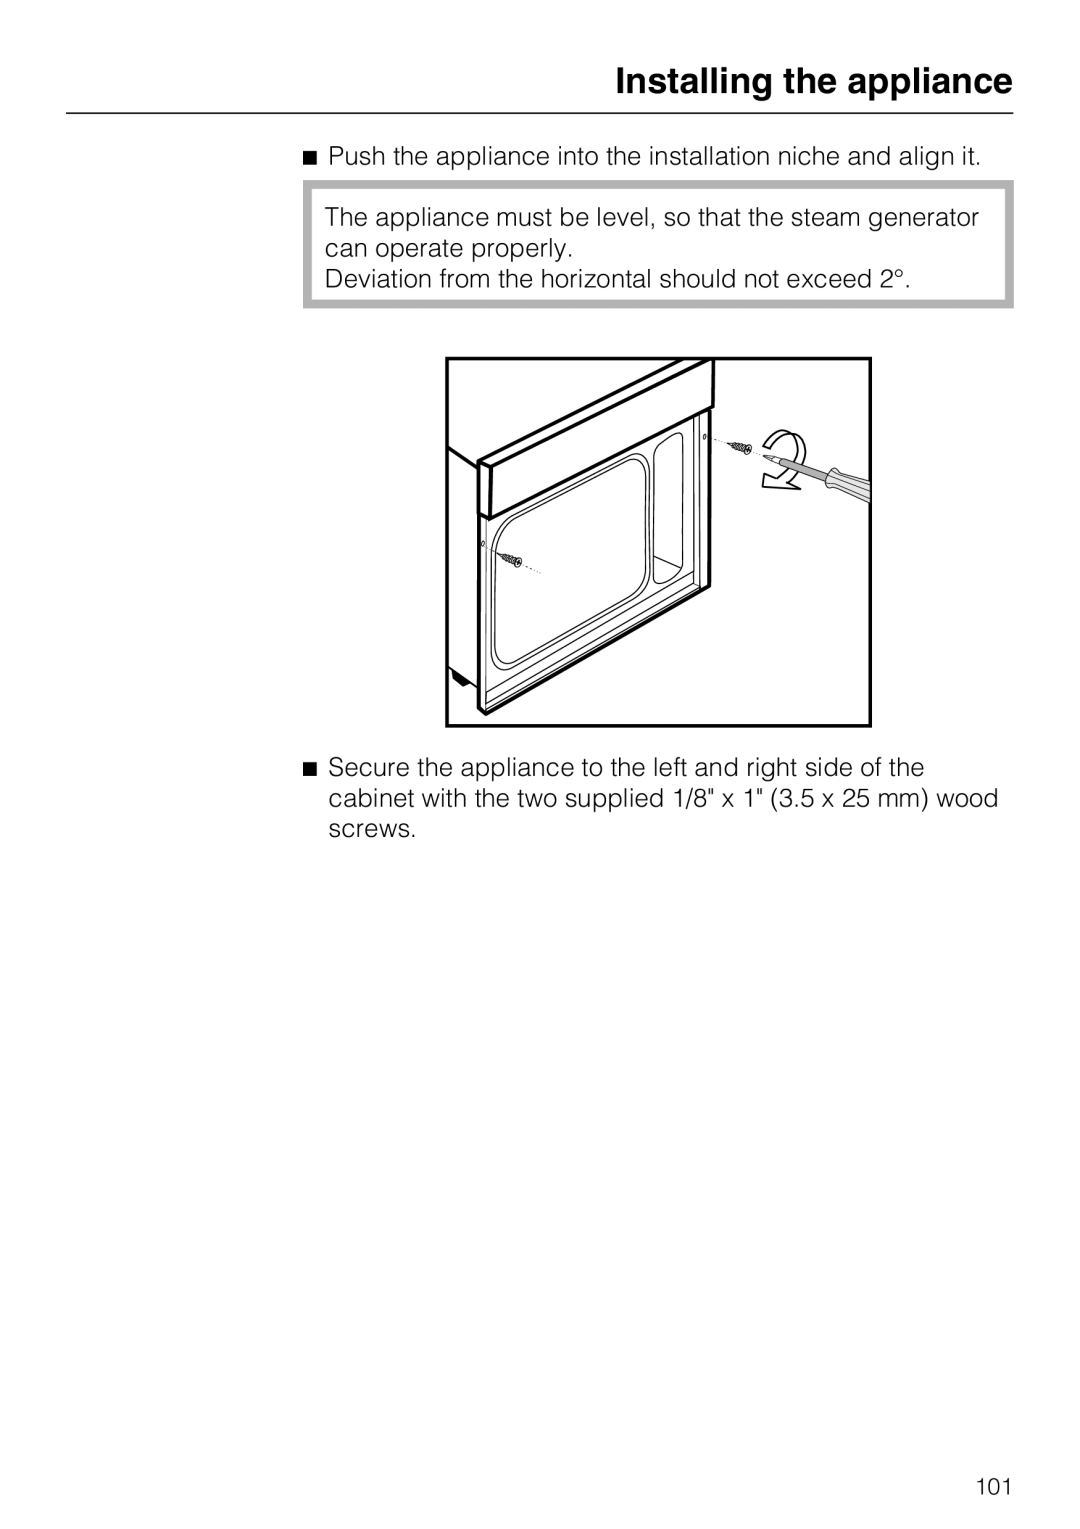 Miele 09 800 830 installation instructions Installing the appliance 